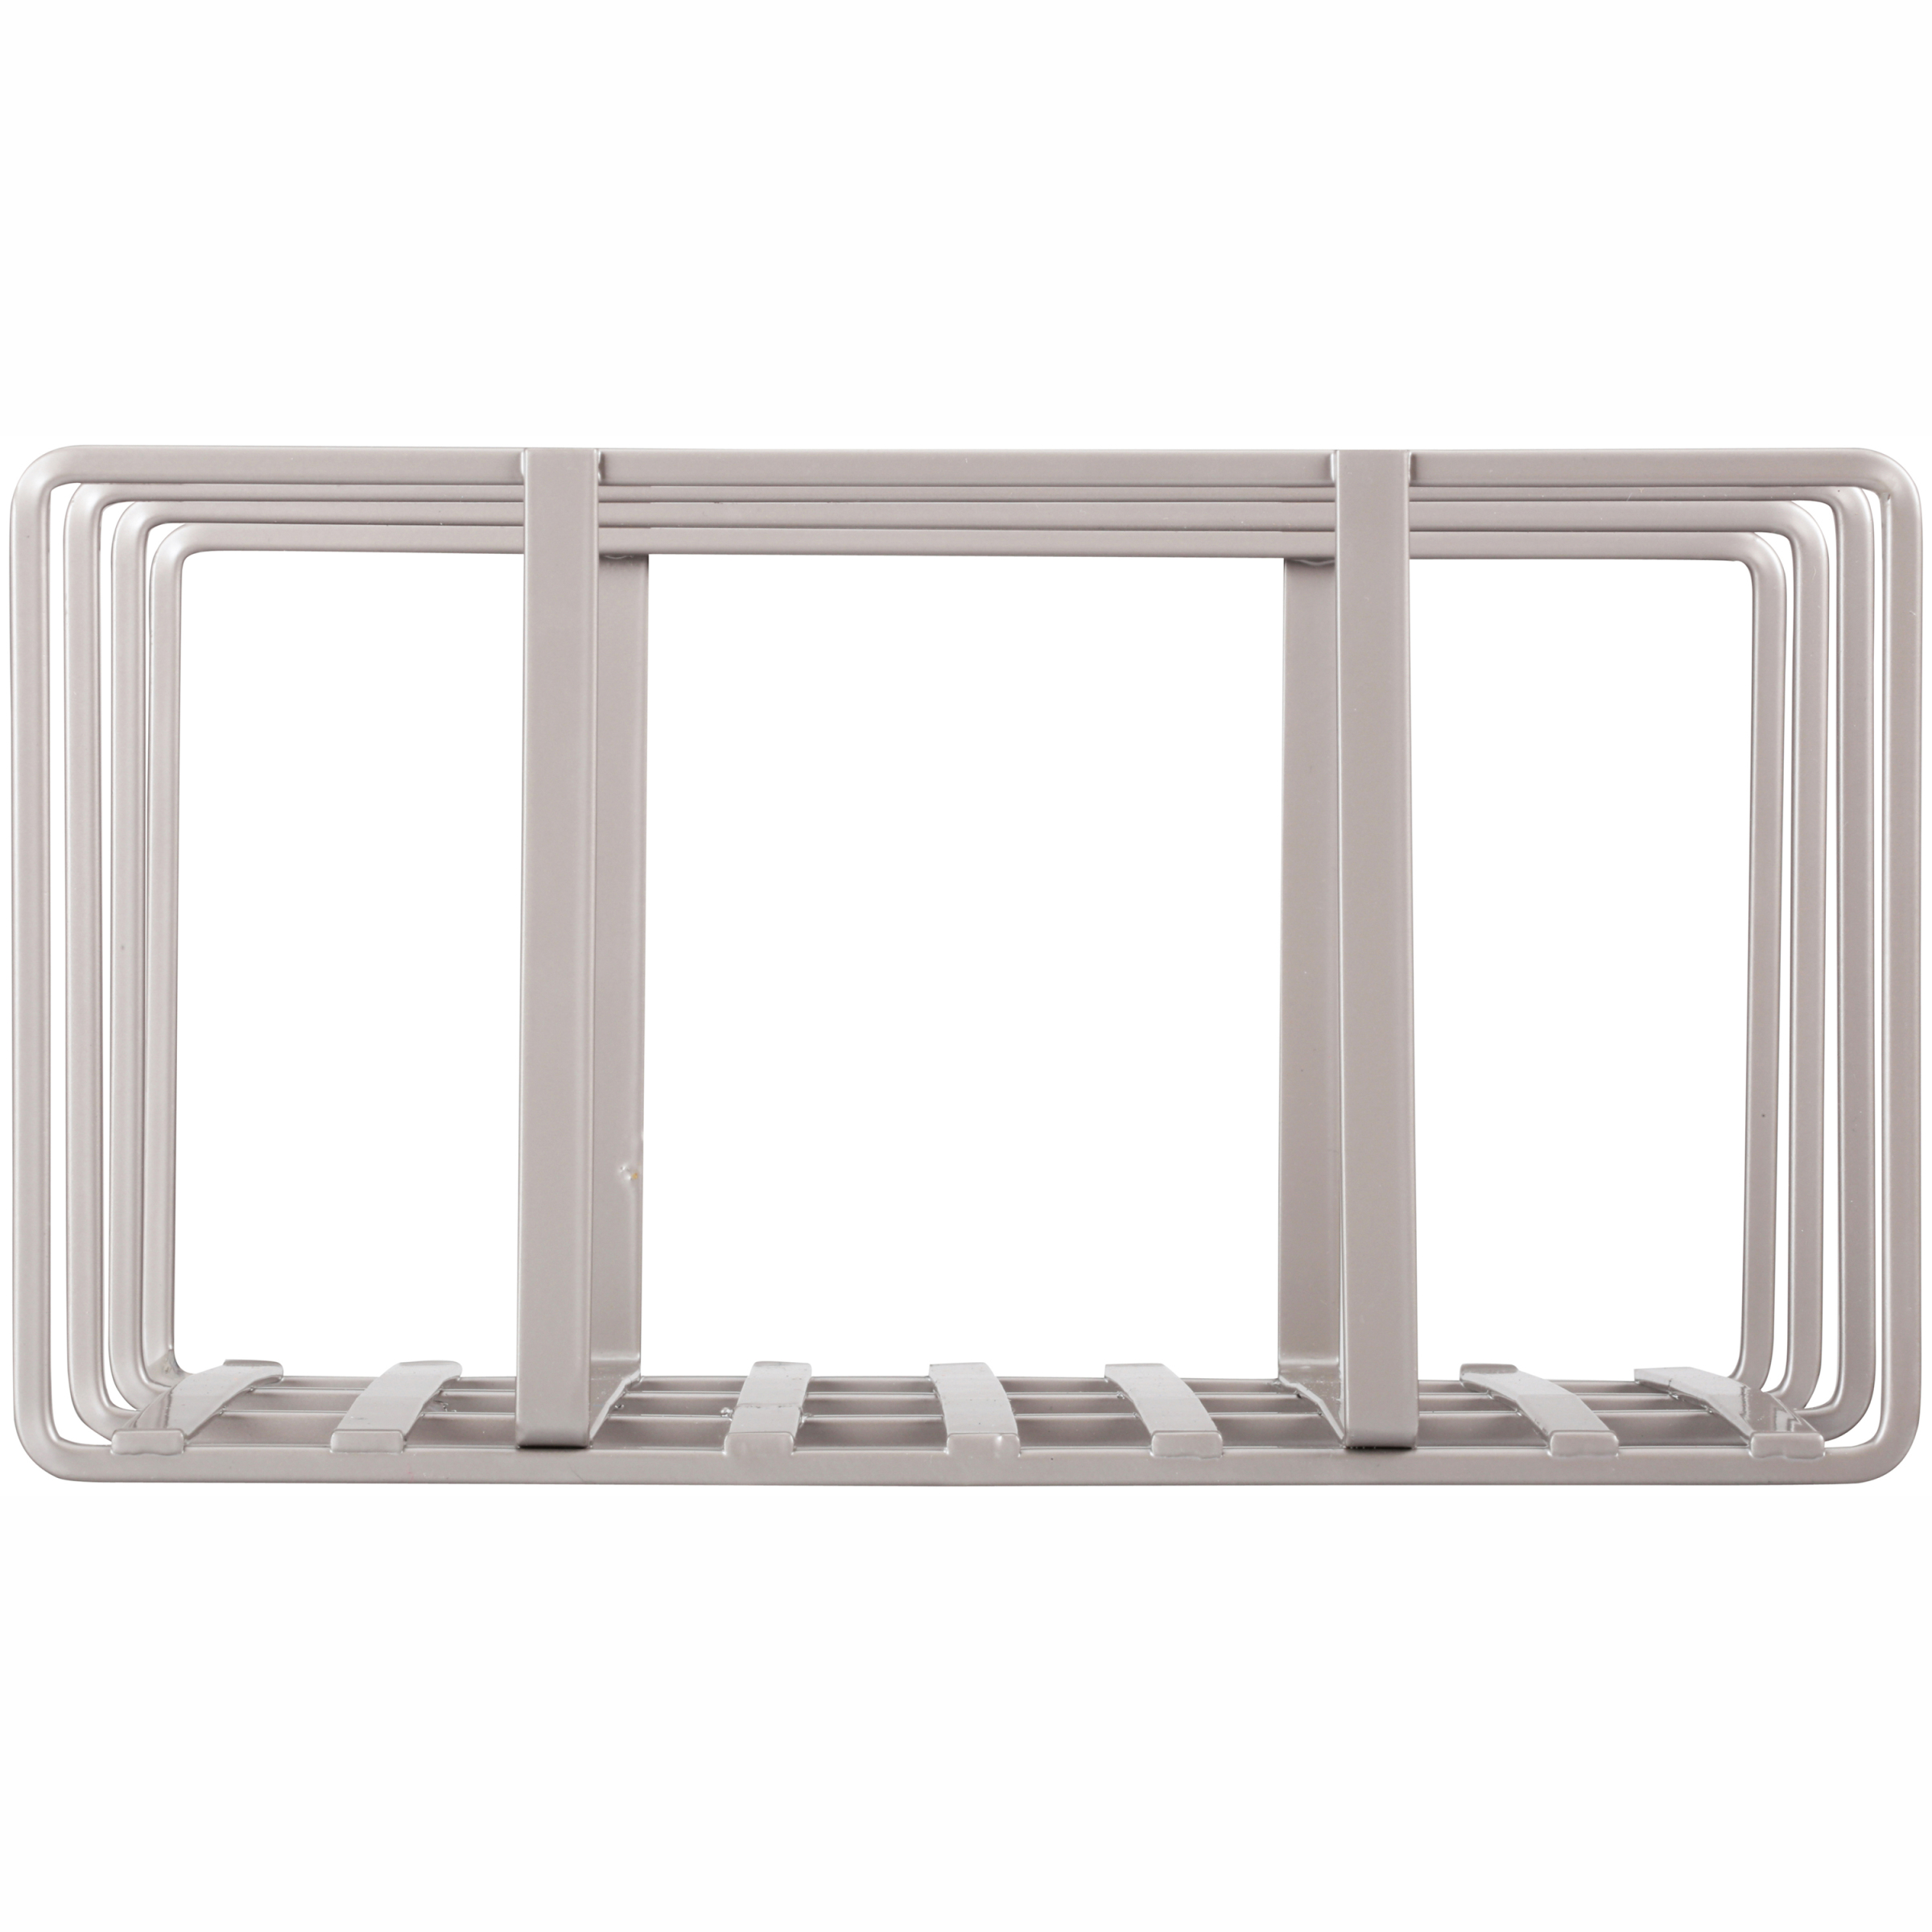 Seville Classics Vertical Pan Lid Rack Kitchen Counter and Cabinet Organizer, 10" W x 8.5" D x 5" H, Platinum - image 4 of 6